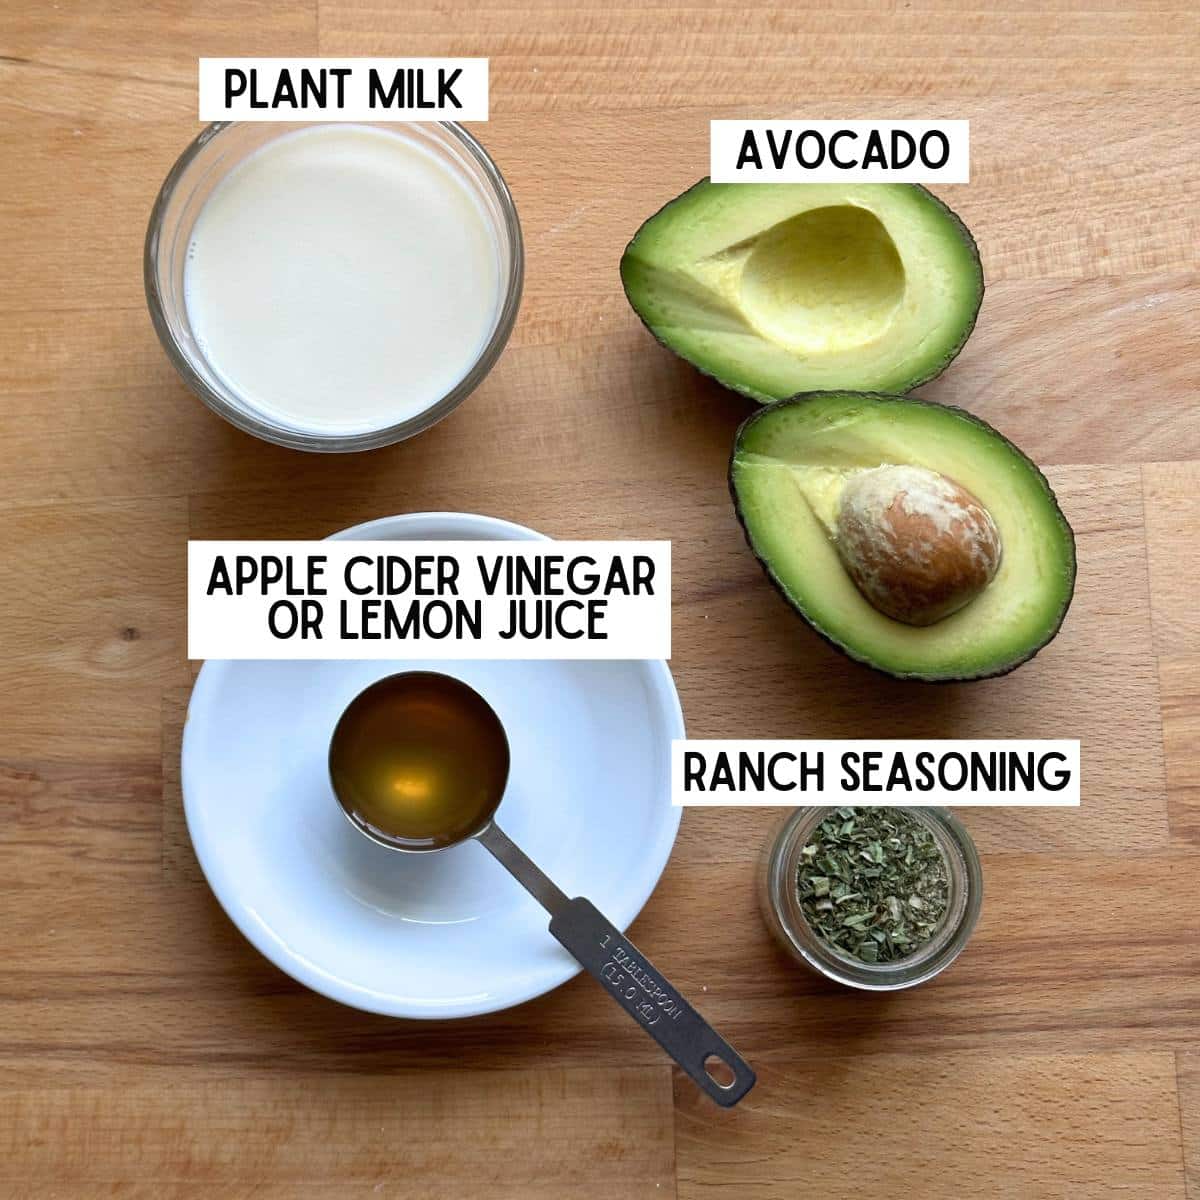 Ingredients to make vegan avocado ranch dressing: plant milk (in a glass bowl), avocado (sliced open in two halves), apple cider vinegar or lemon juice (in a tablespoon on top of a white plate), and ranch seasoning (in a glass bowl).